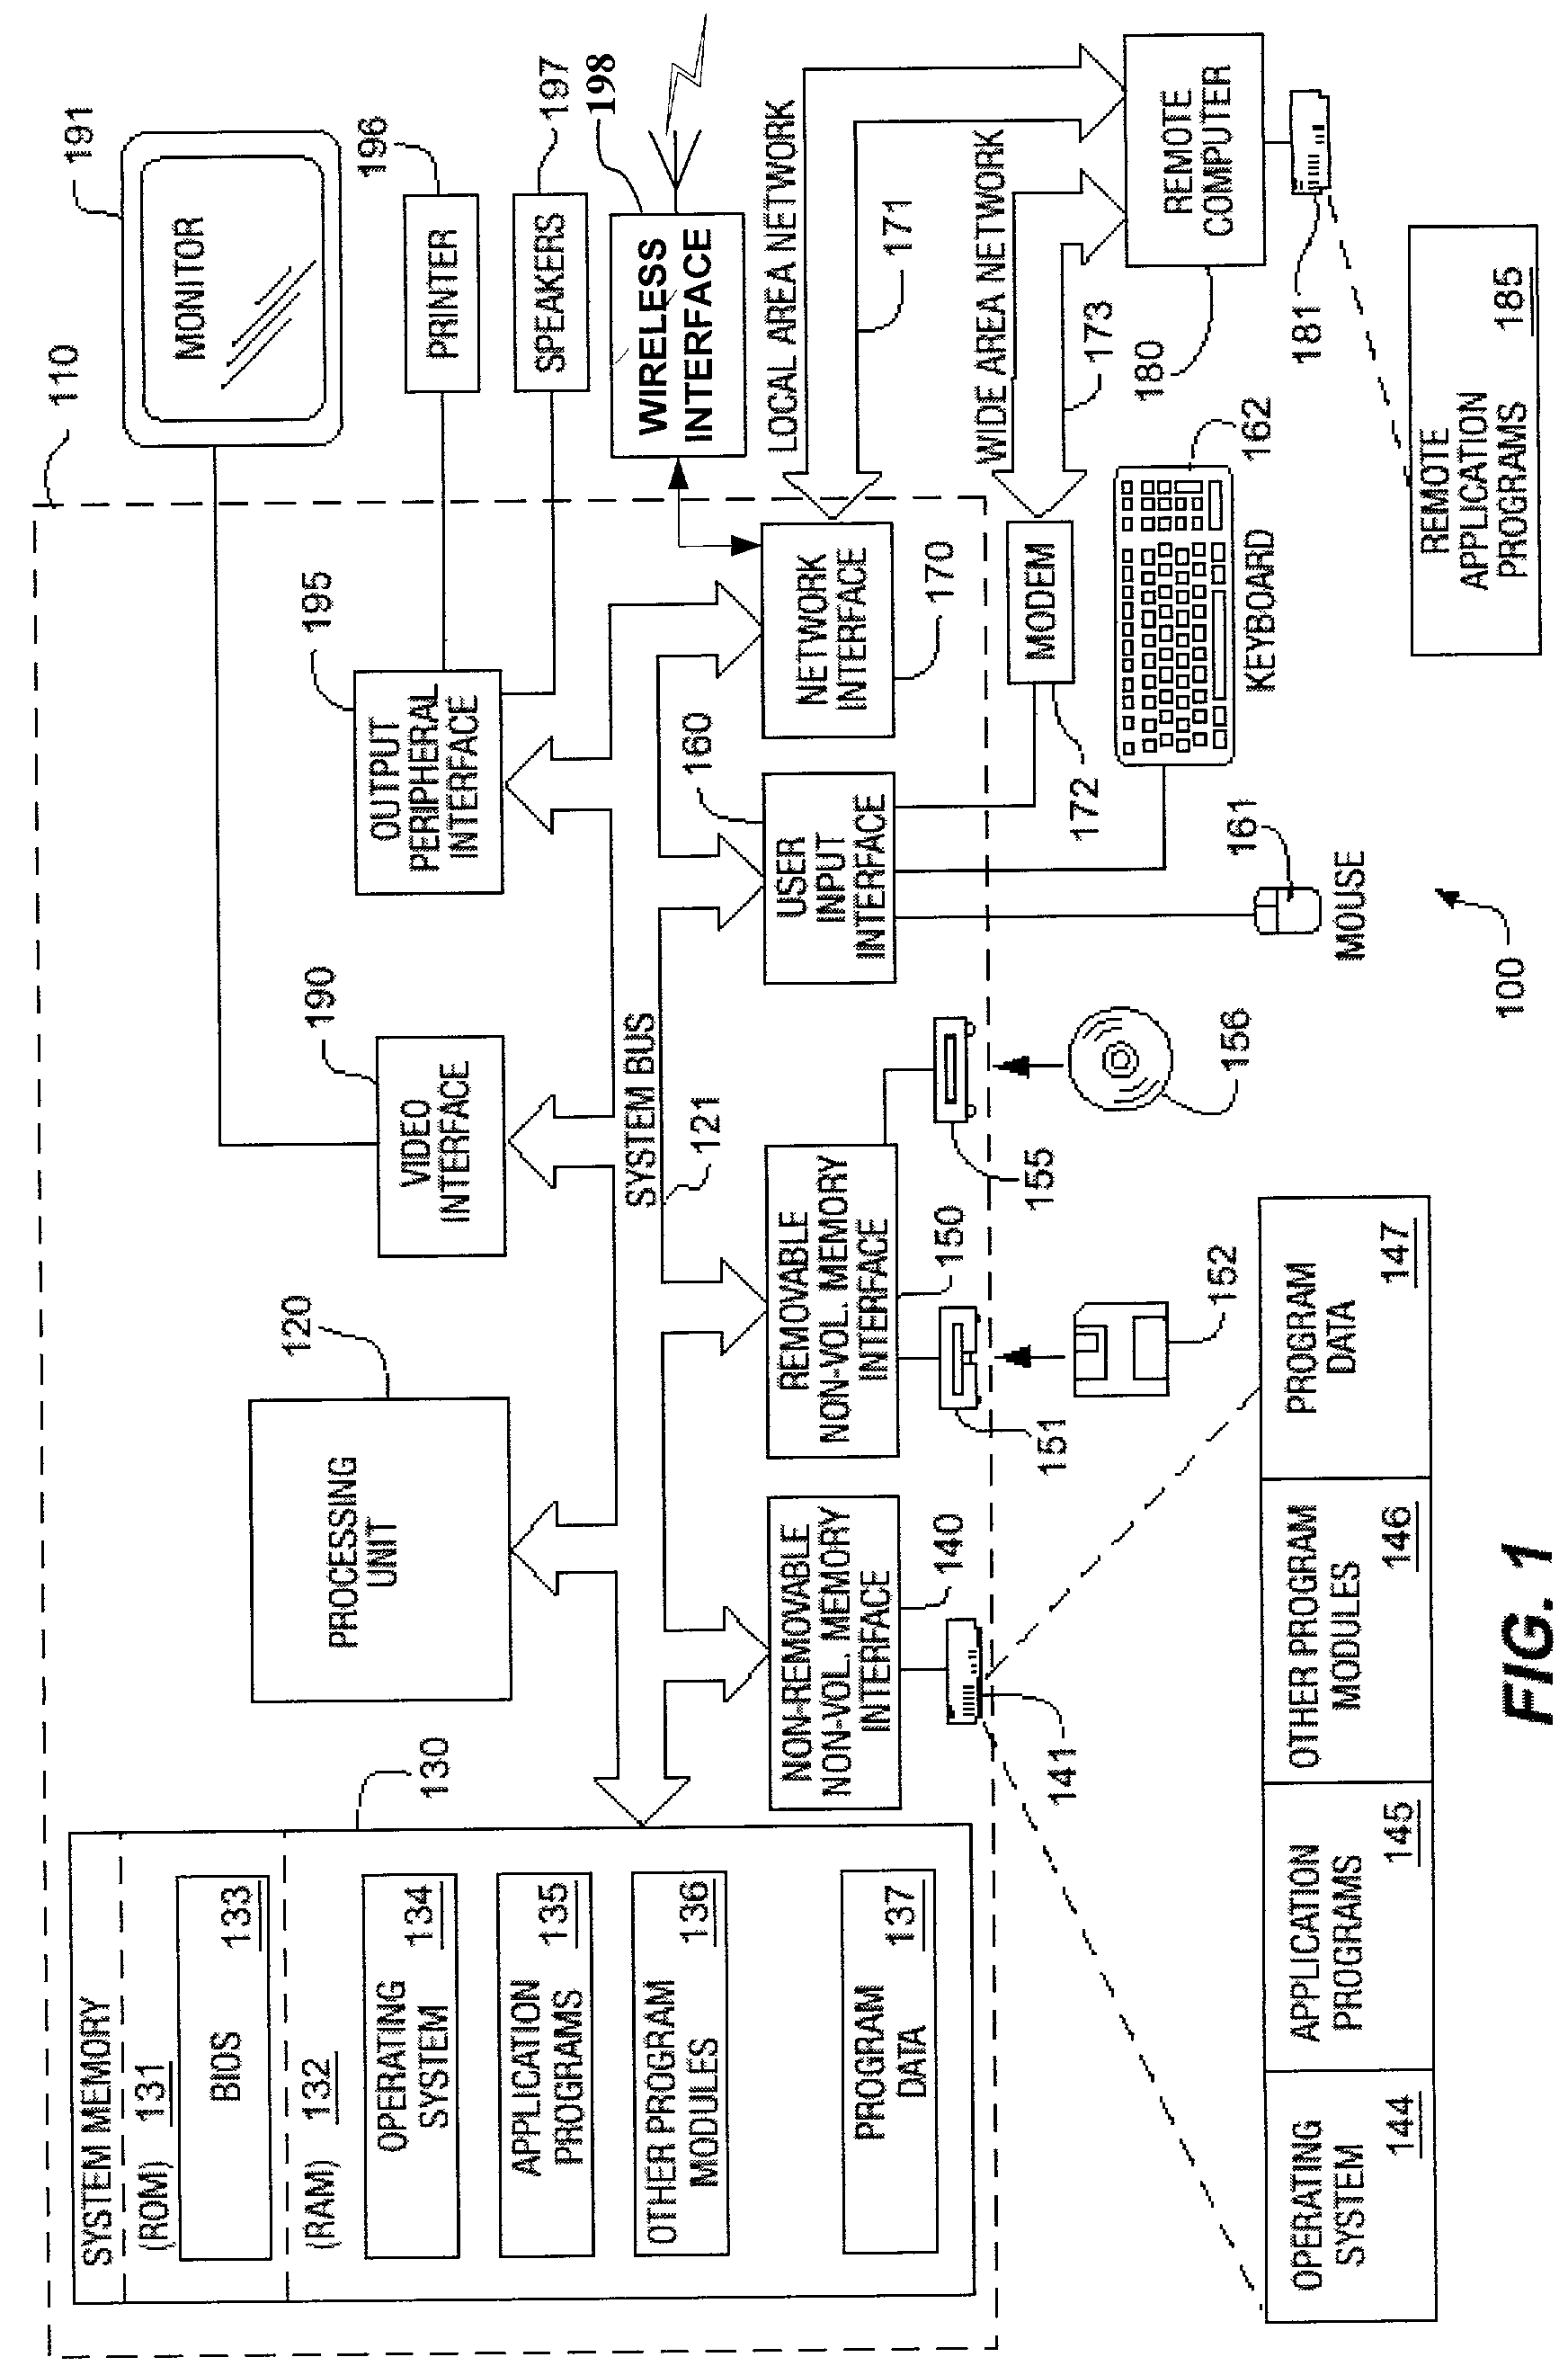 System and method for coordinating bandwidth usage of a communication channel by wireless network nodes